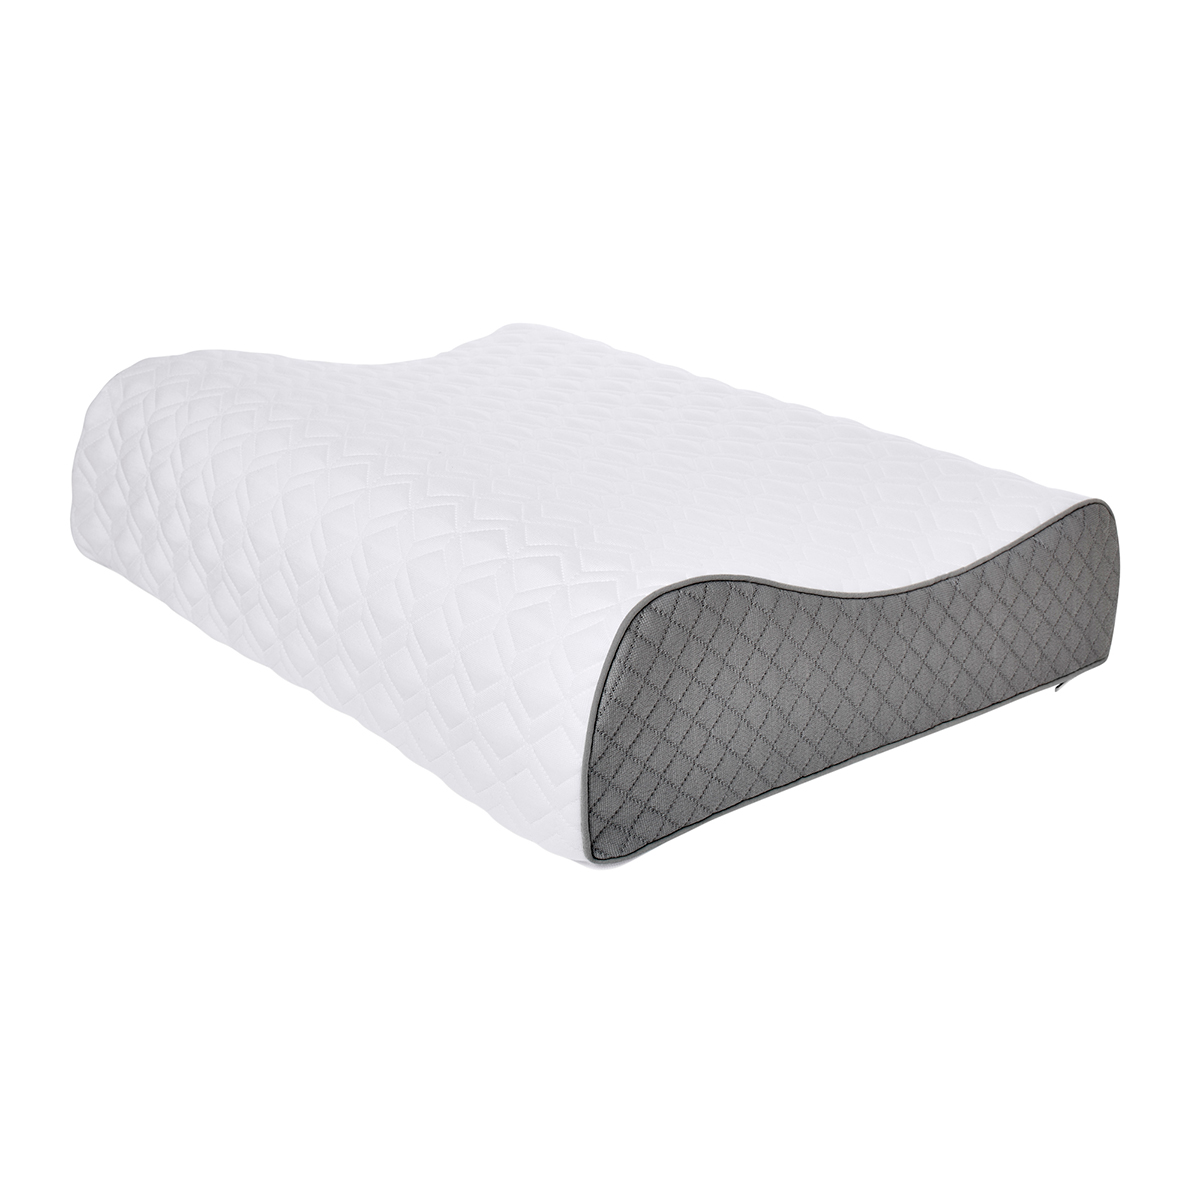 Sealy Memory Foam Contour Pillow with Cover